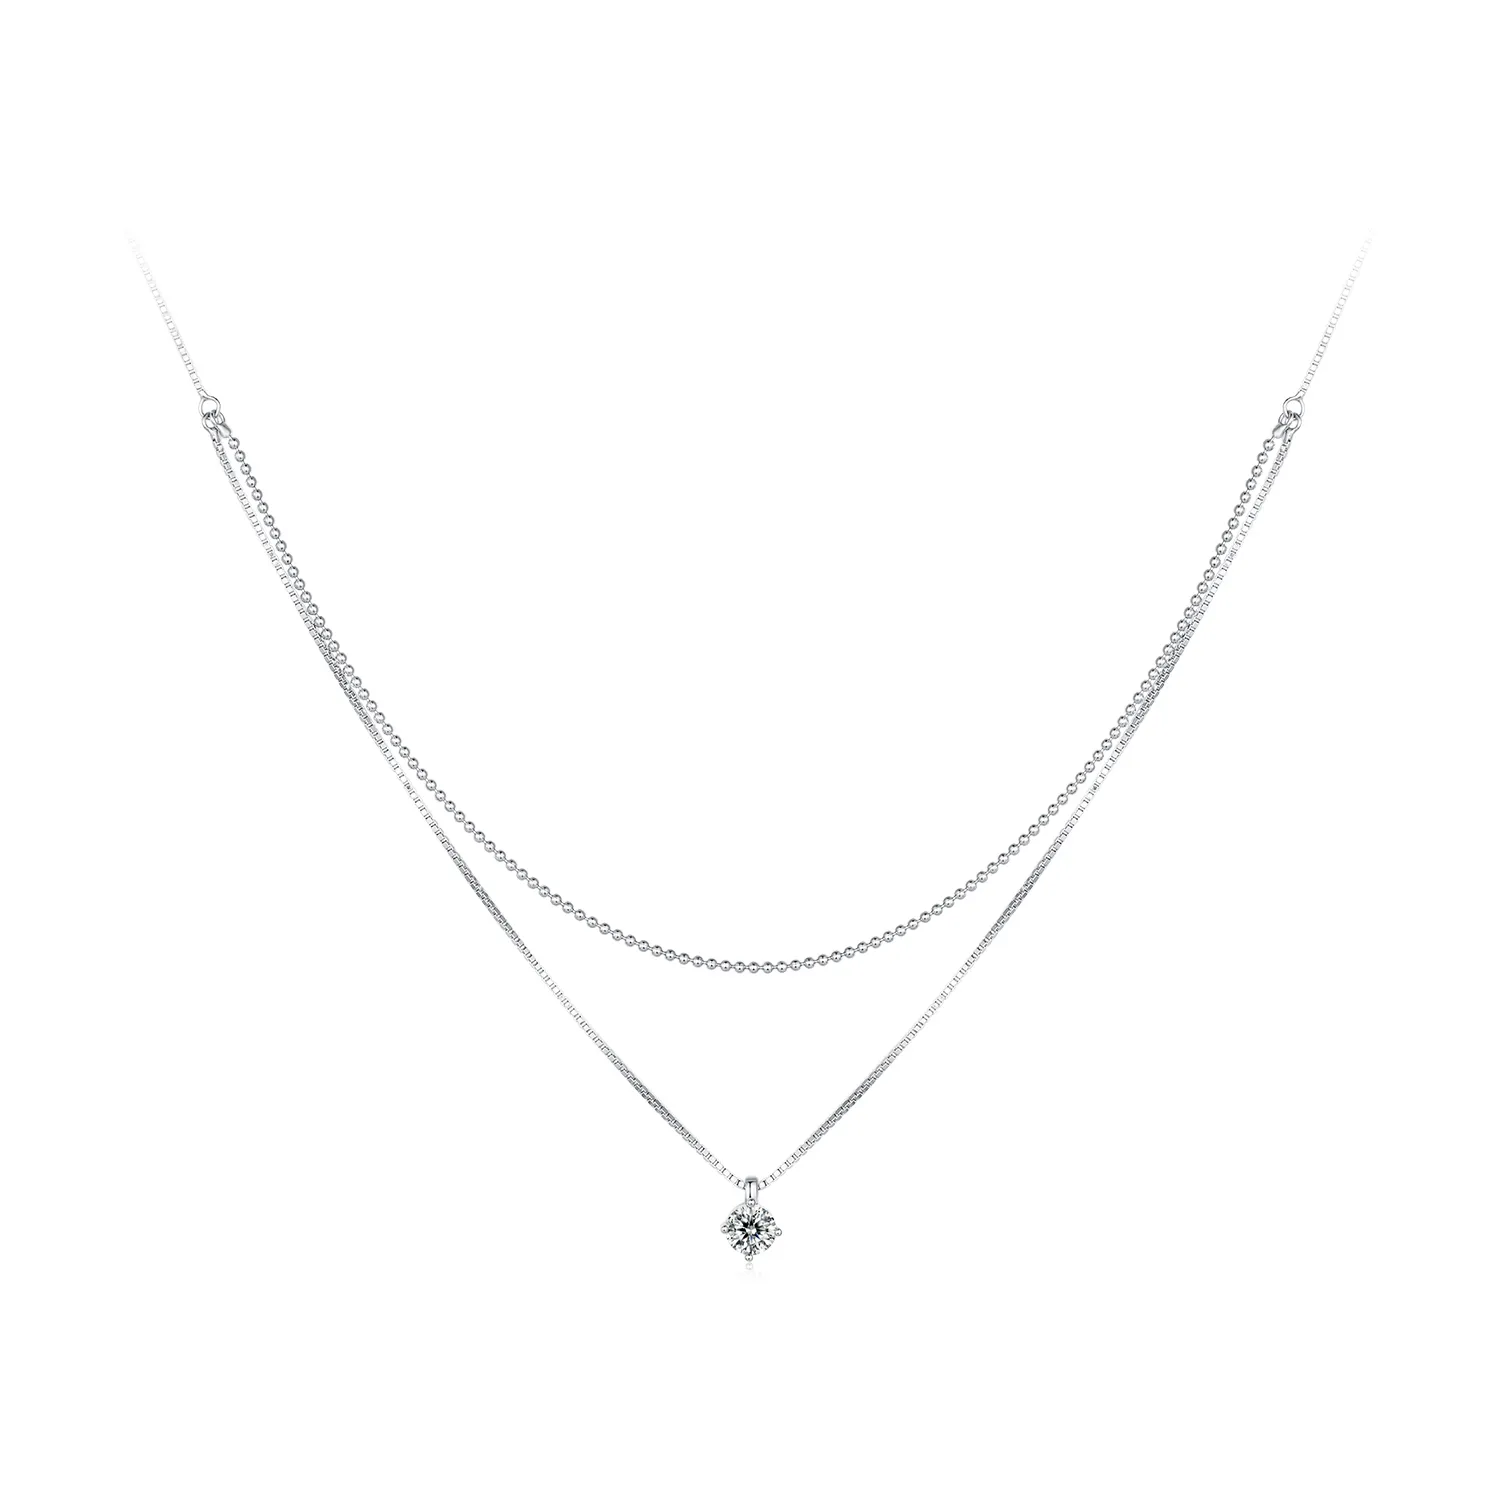 Pandora Style Shiny Double Layer Necklace - BSN358